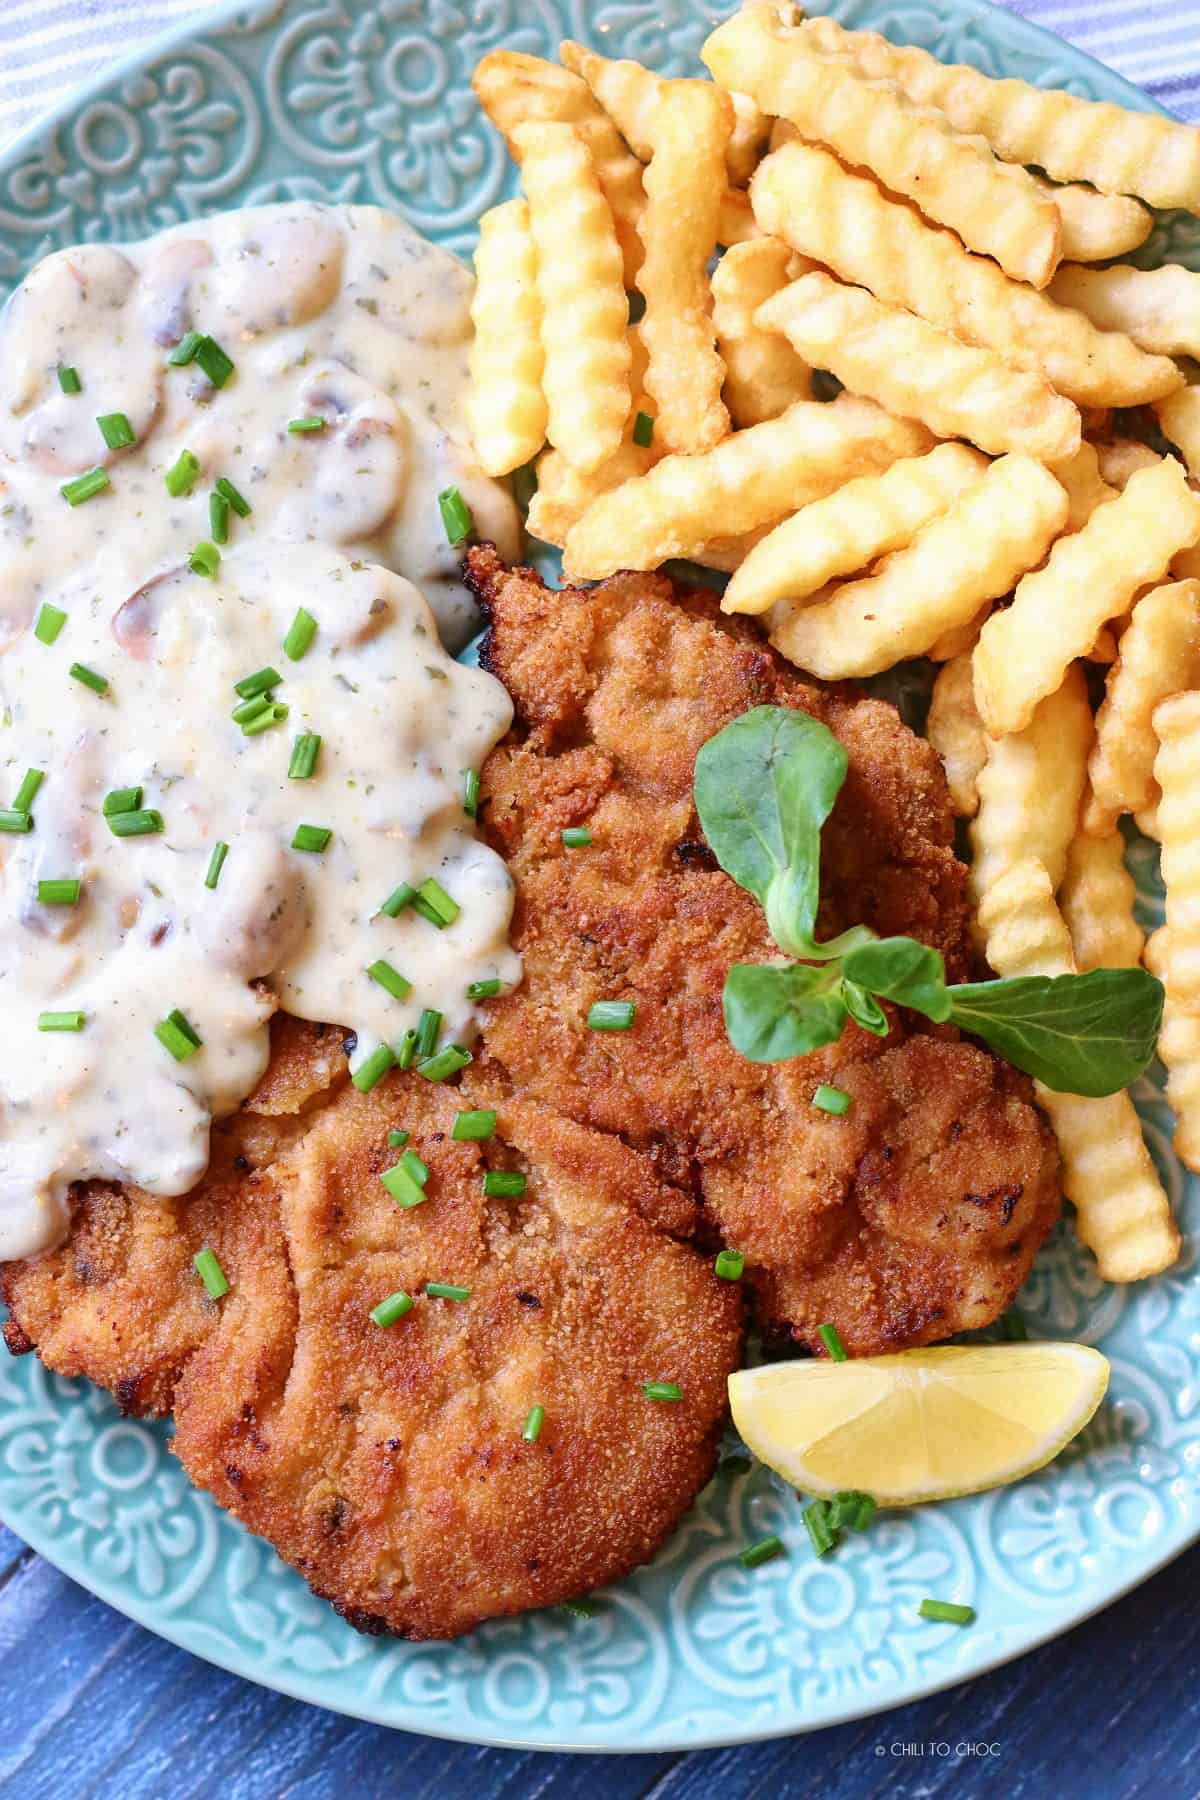 Chicken schnitzel with mushroom sauce and fries.